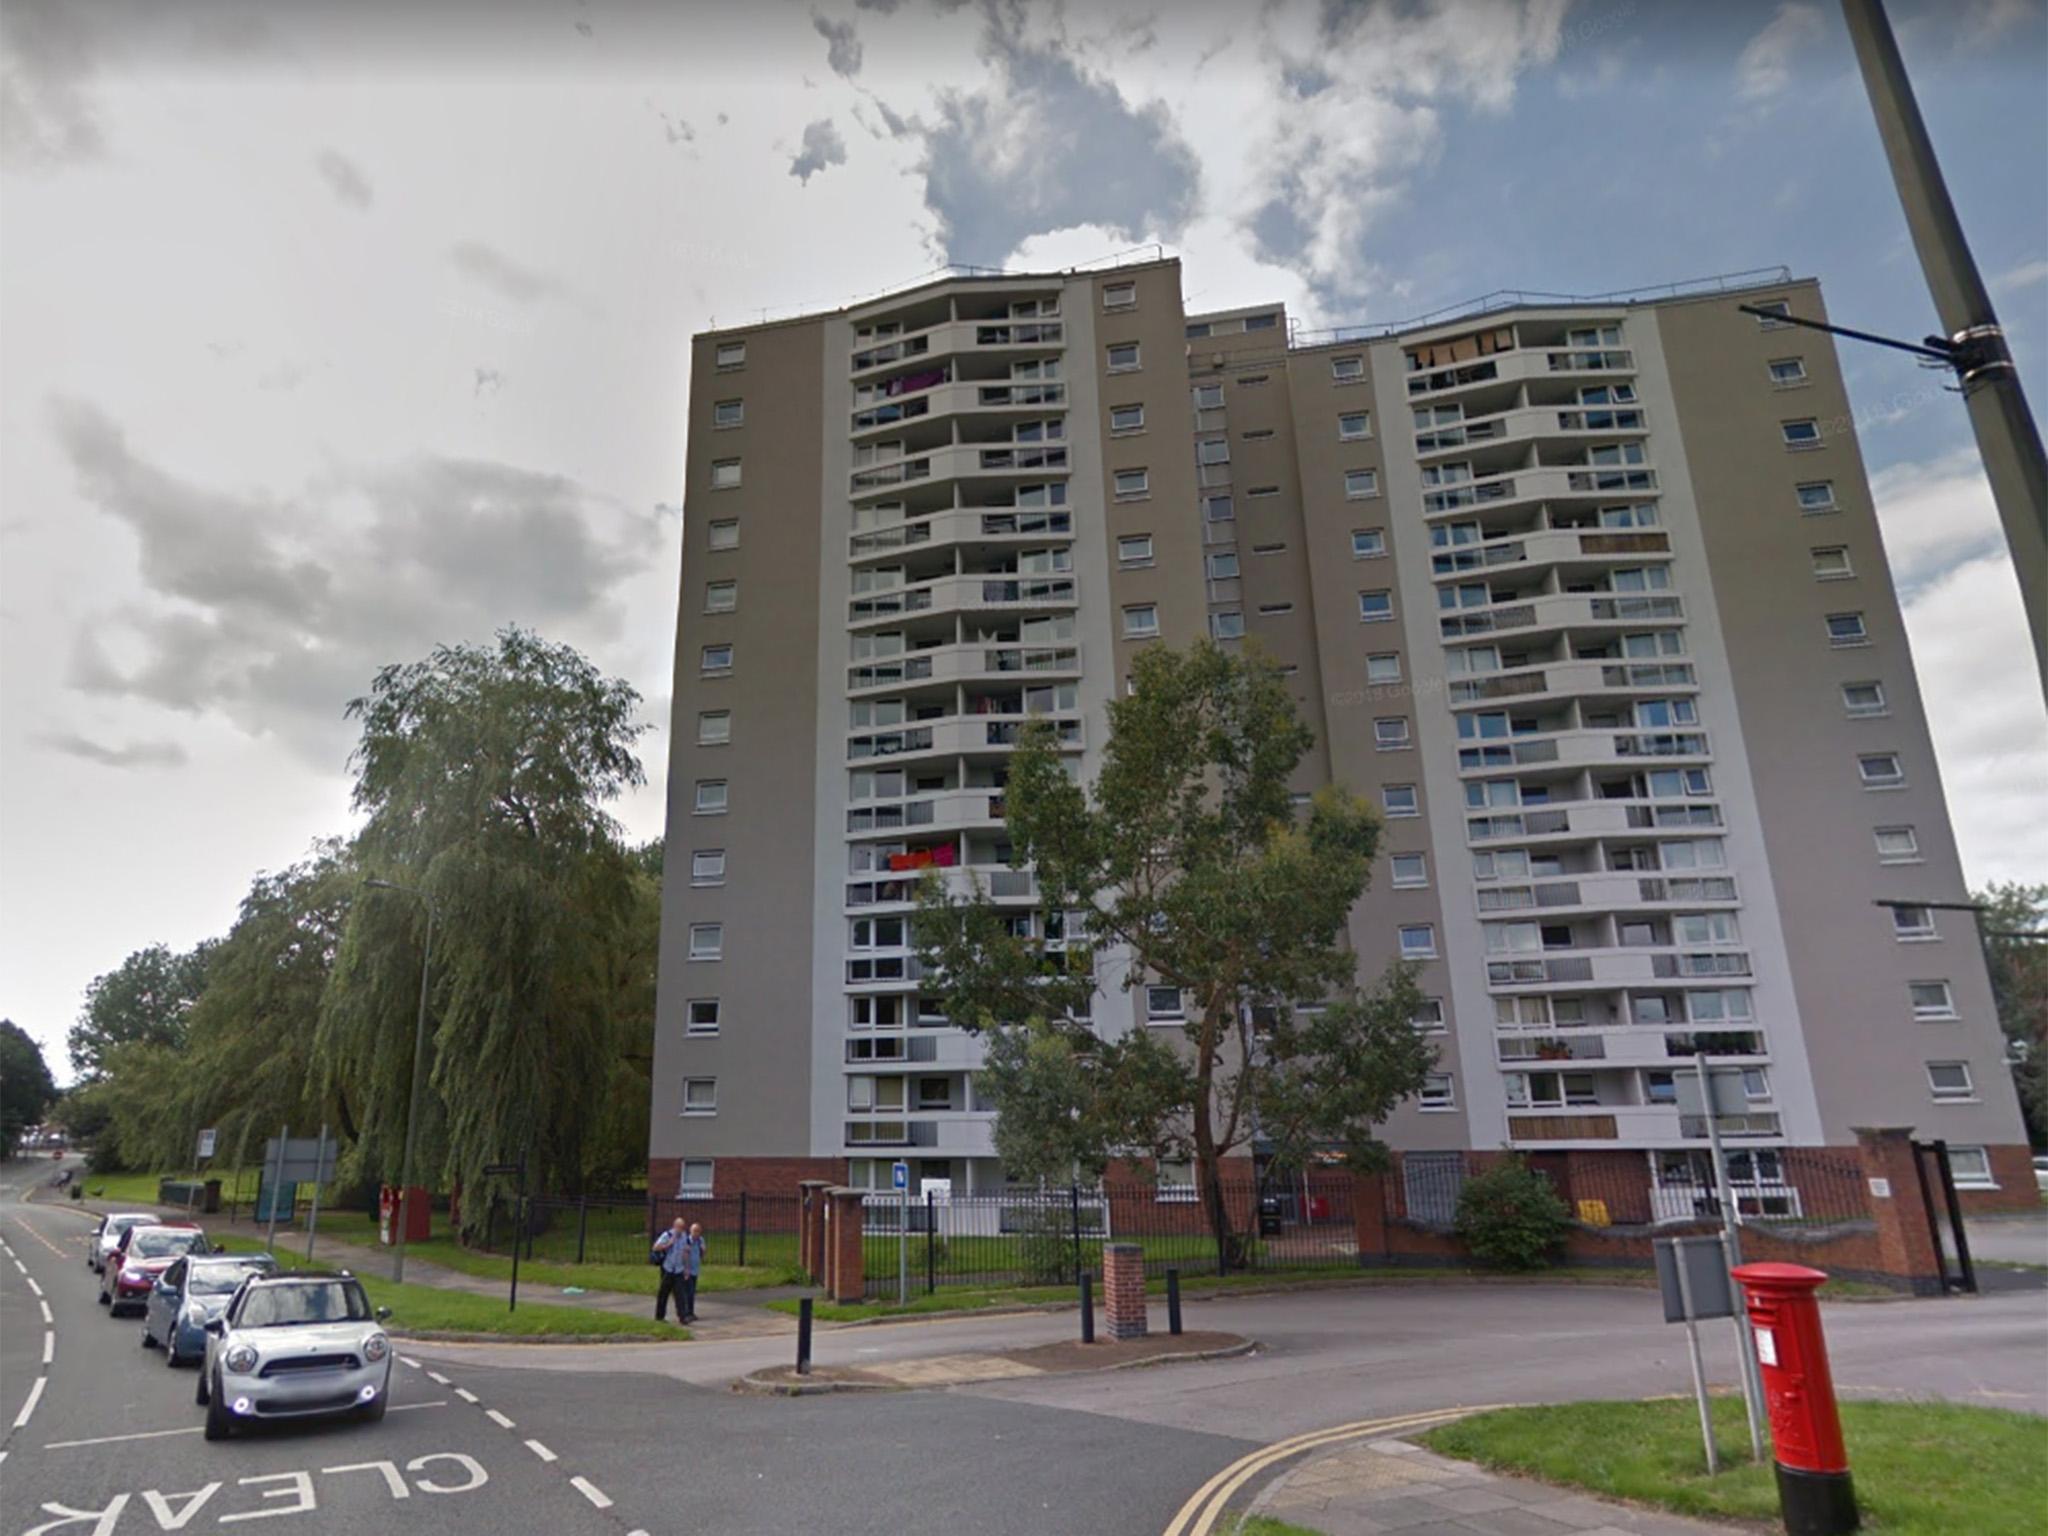 Woman fell from a block of flats on Millgate, near Wigan town centre